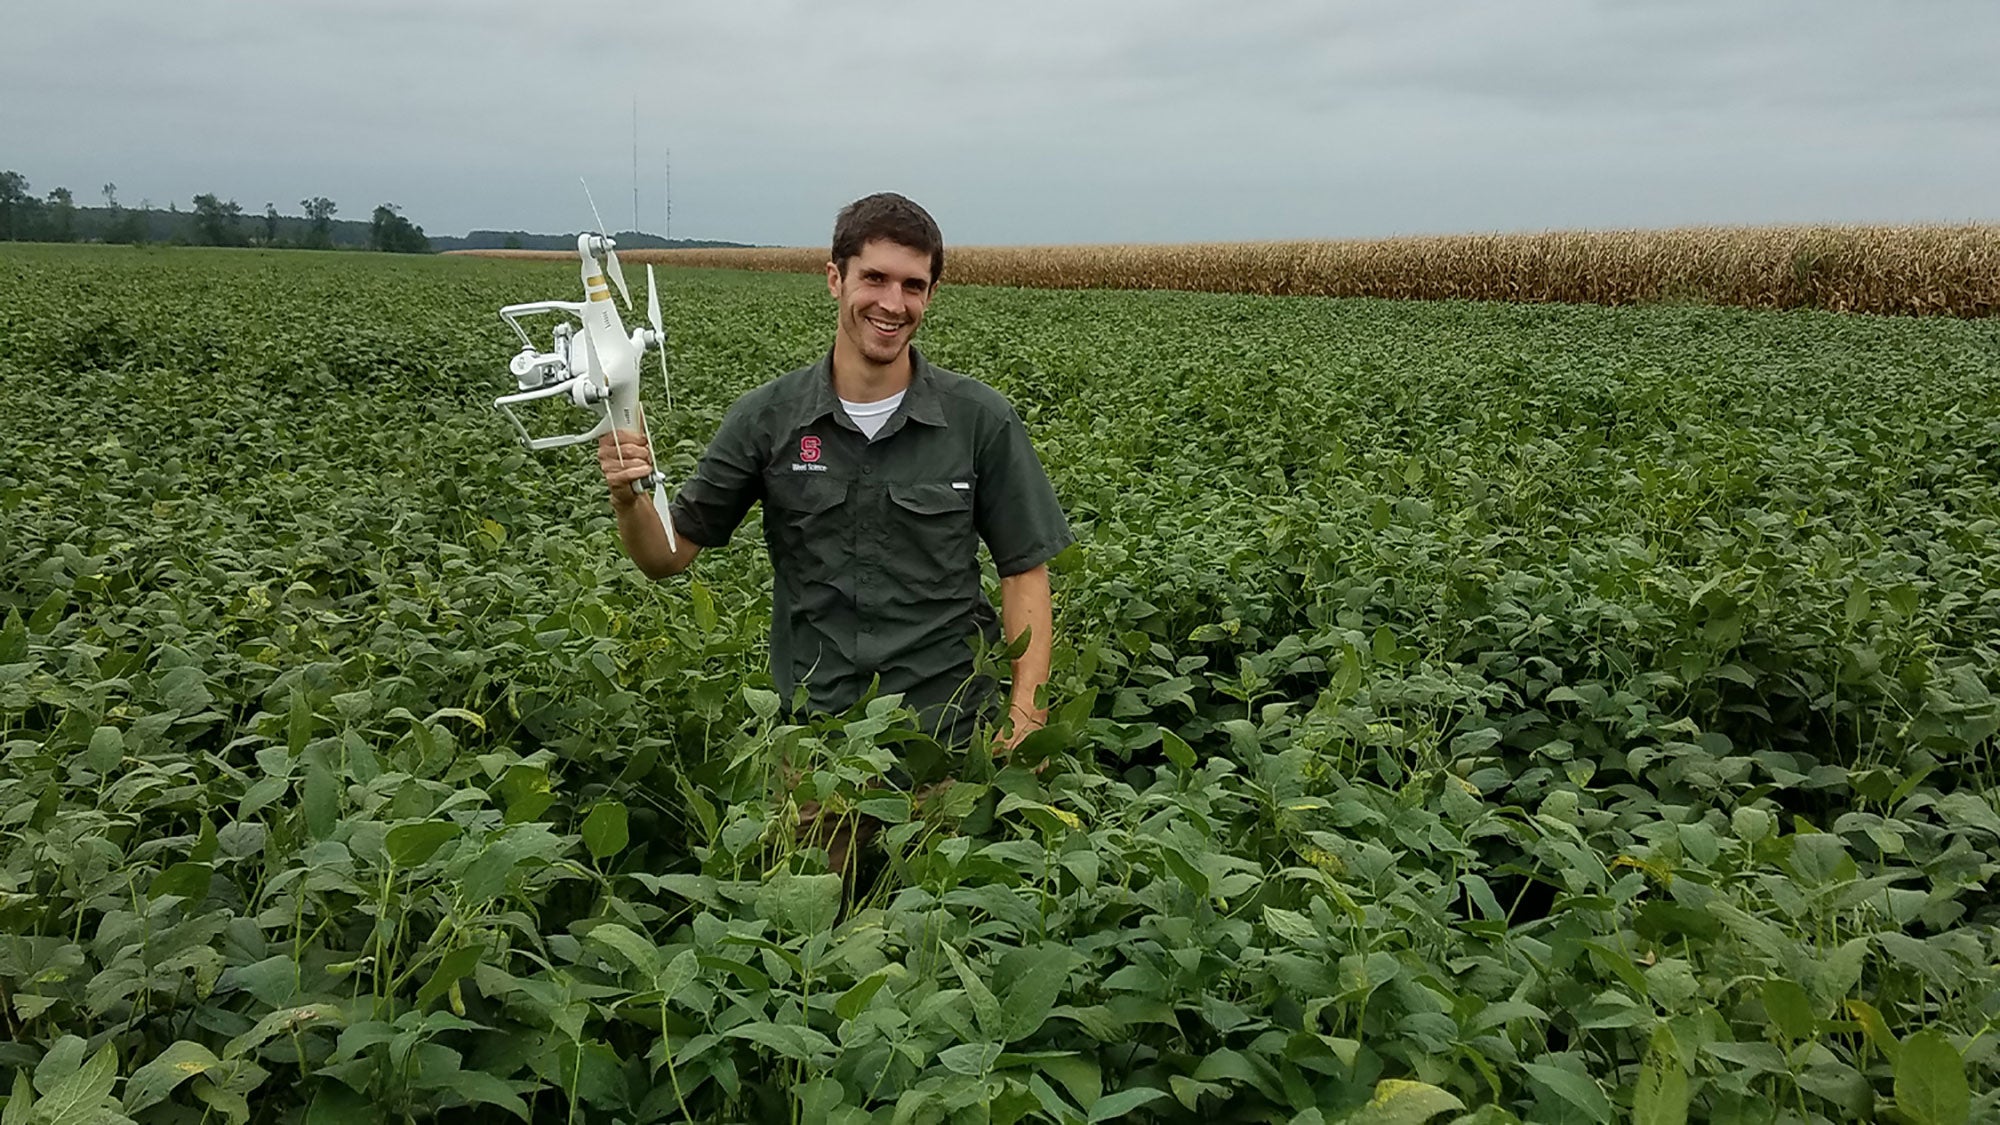 scouting-drone-in-soybeans-ncsu